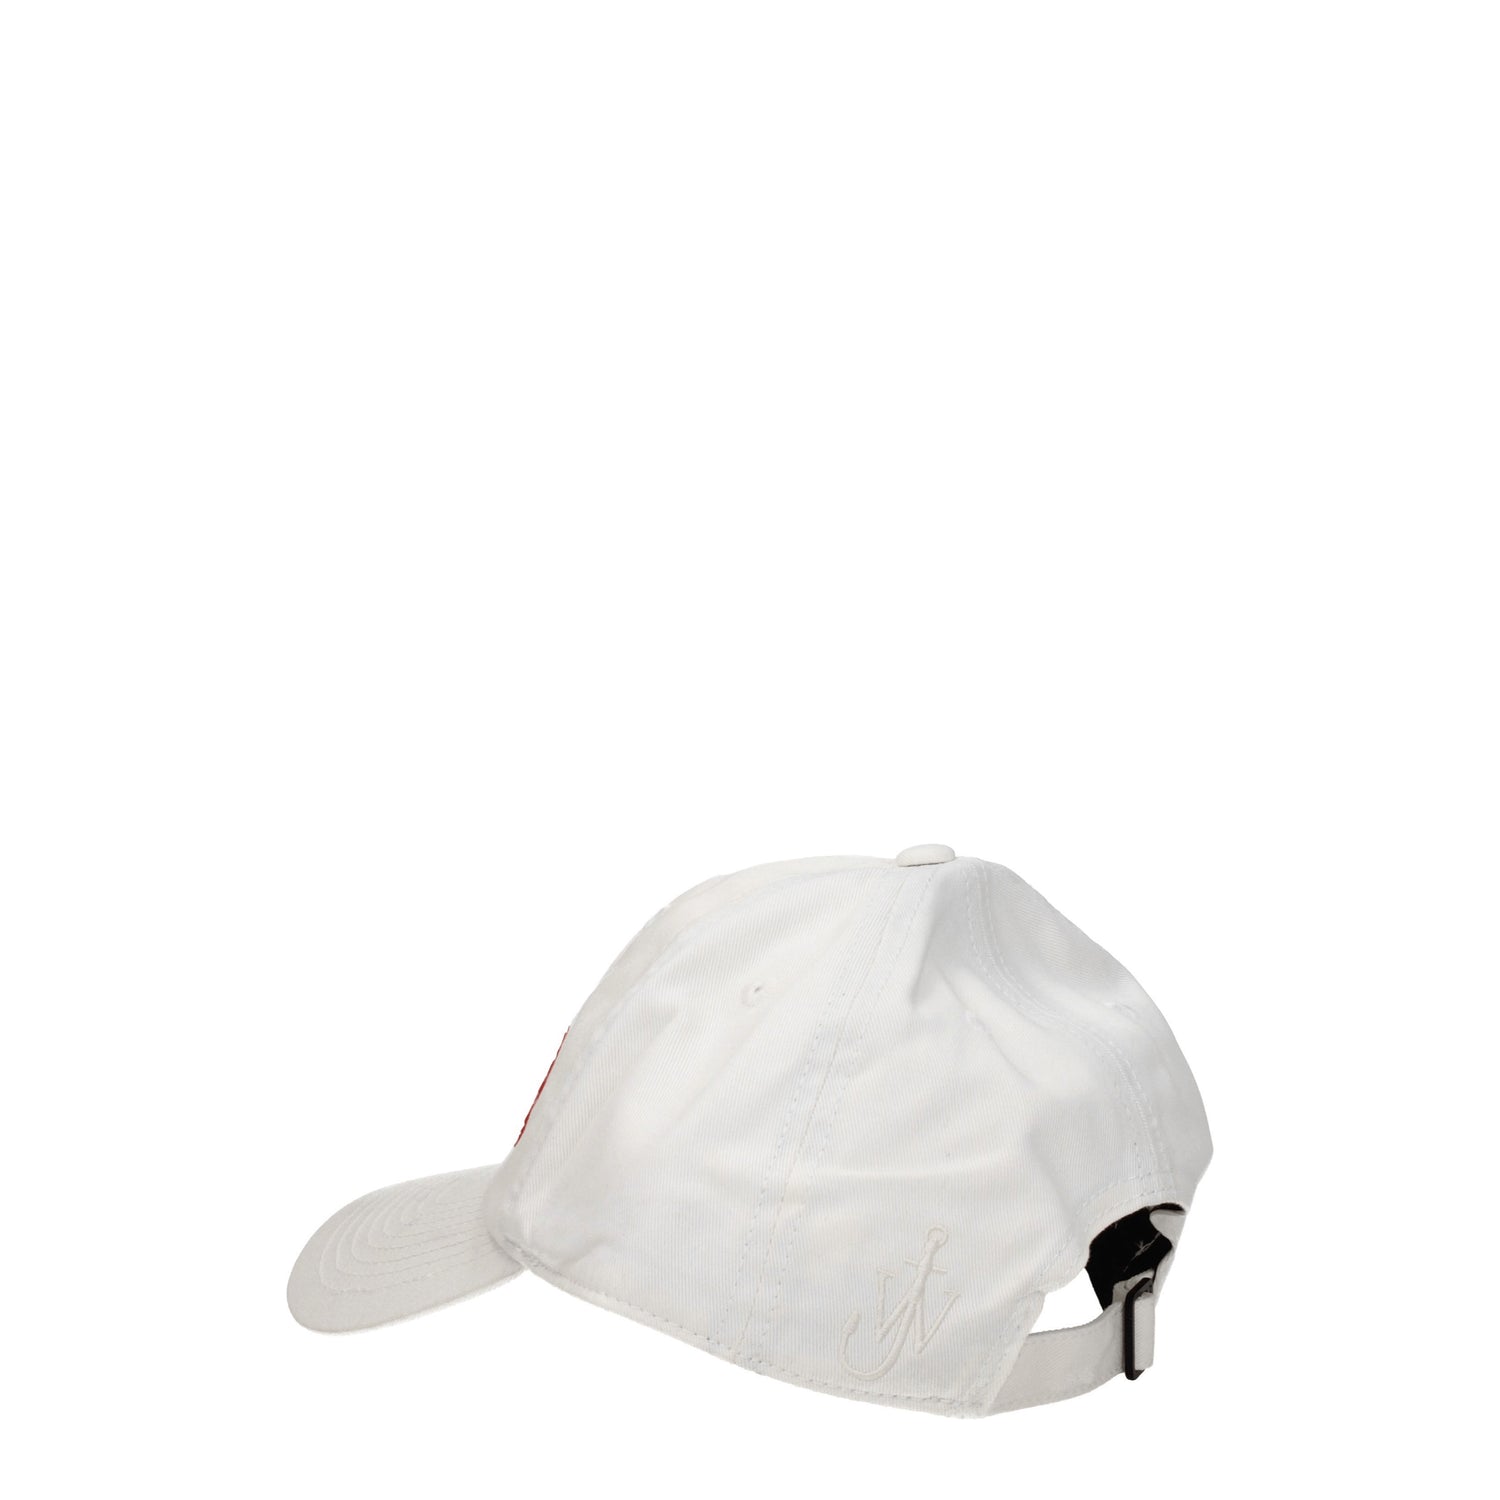 Jw Anderson Cappelli carrie Donna Cotone Bianco Bianco Sporco